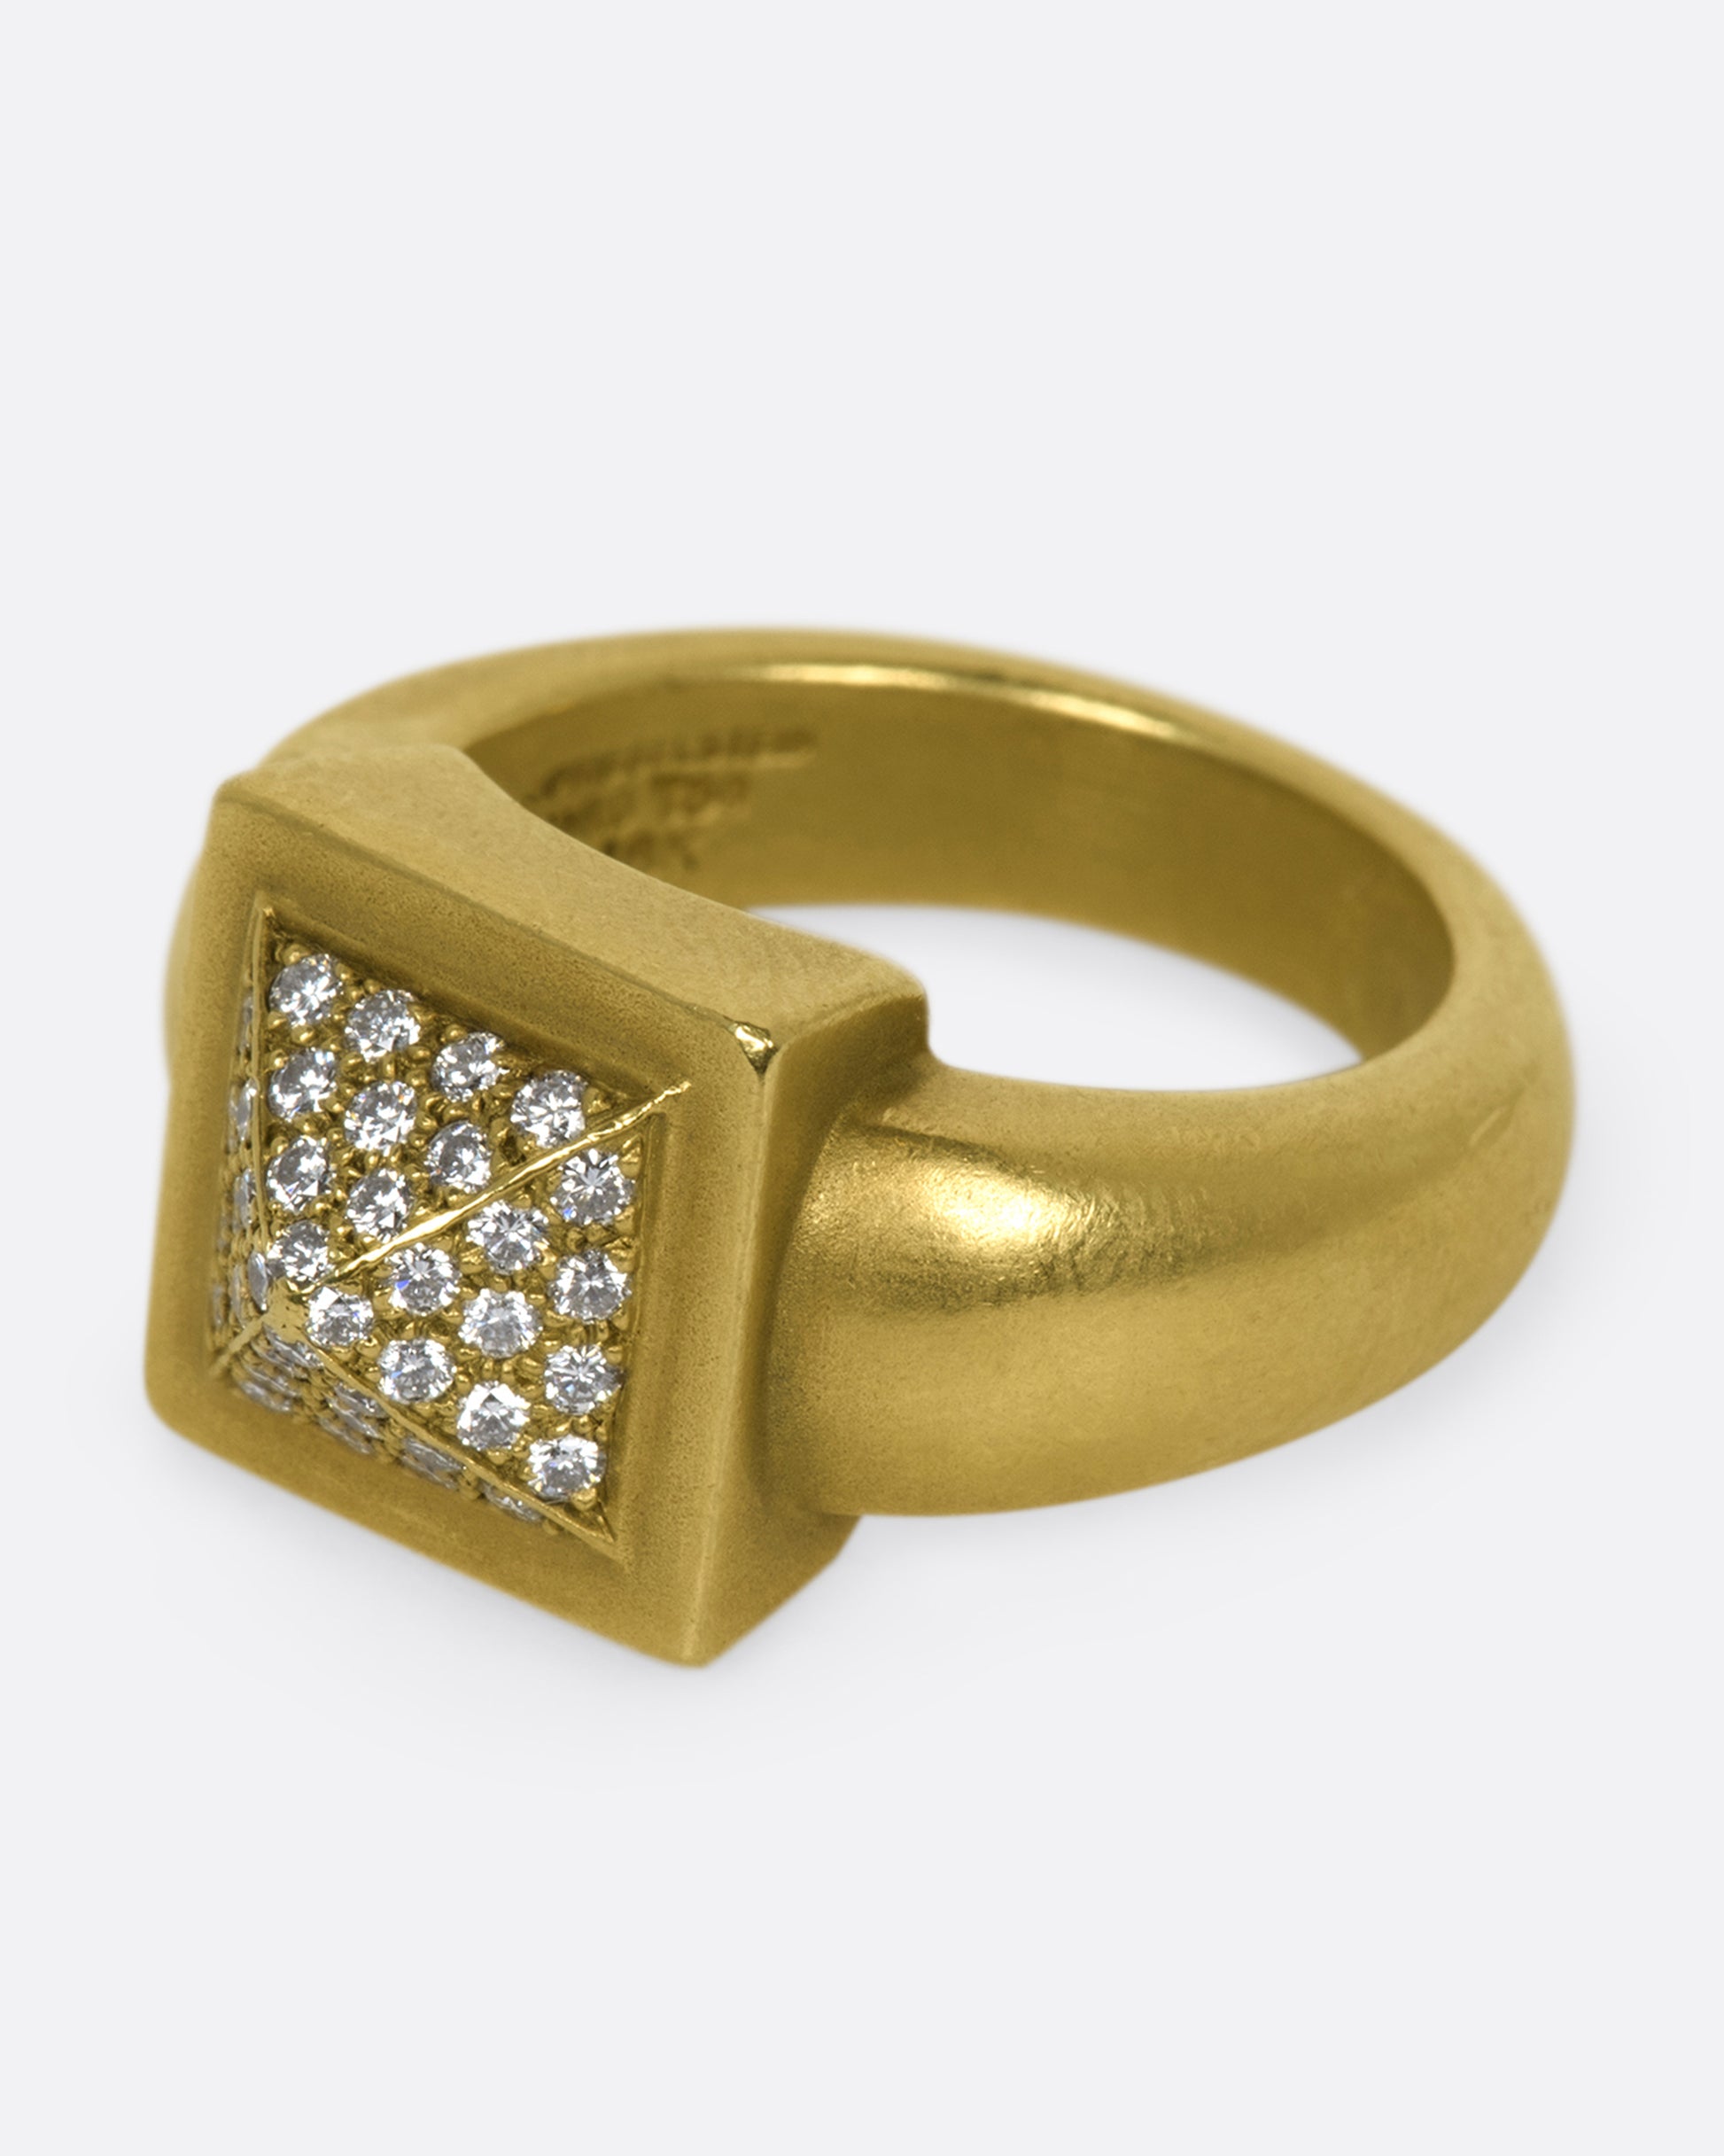 A heavy rounded gold ring with a square, pointed face covered in diamonds.